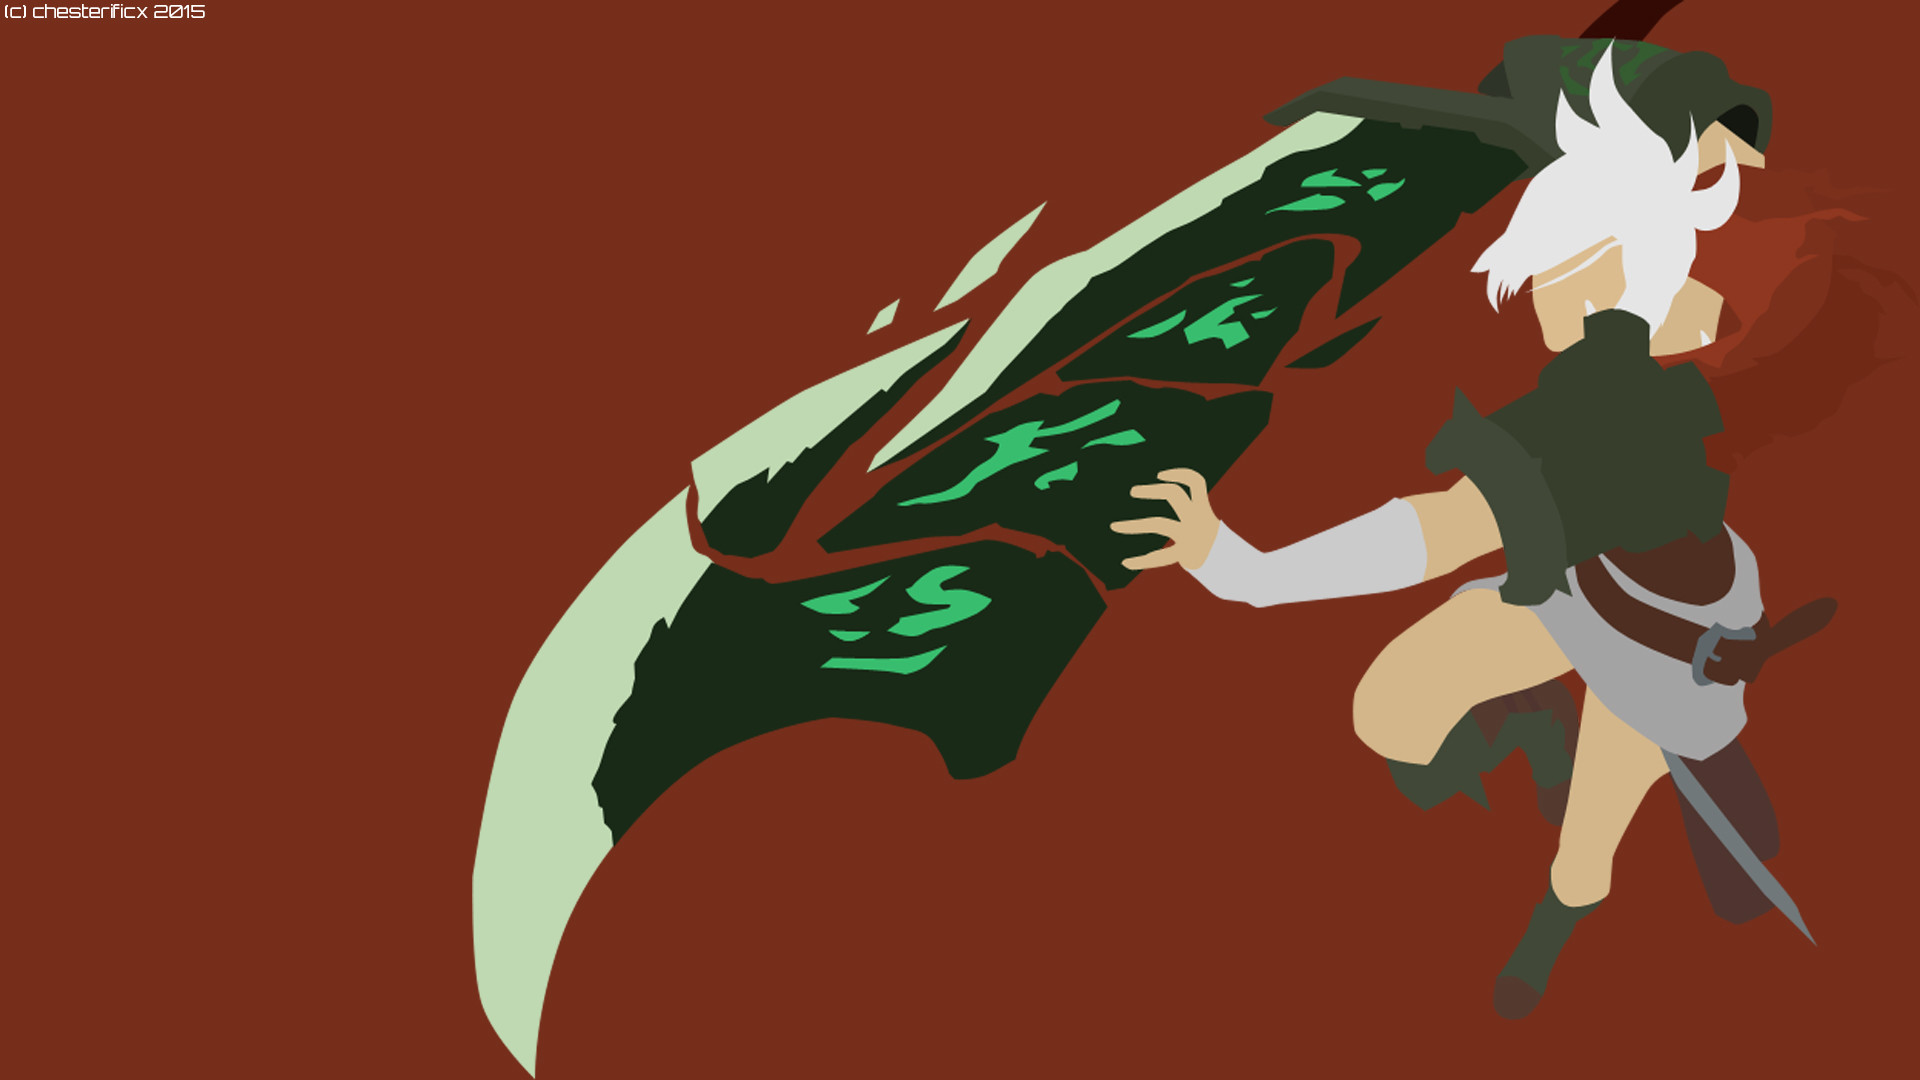 1920x1080 ... Riven from League of Legends by Chesterificx